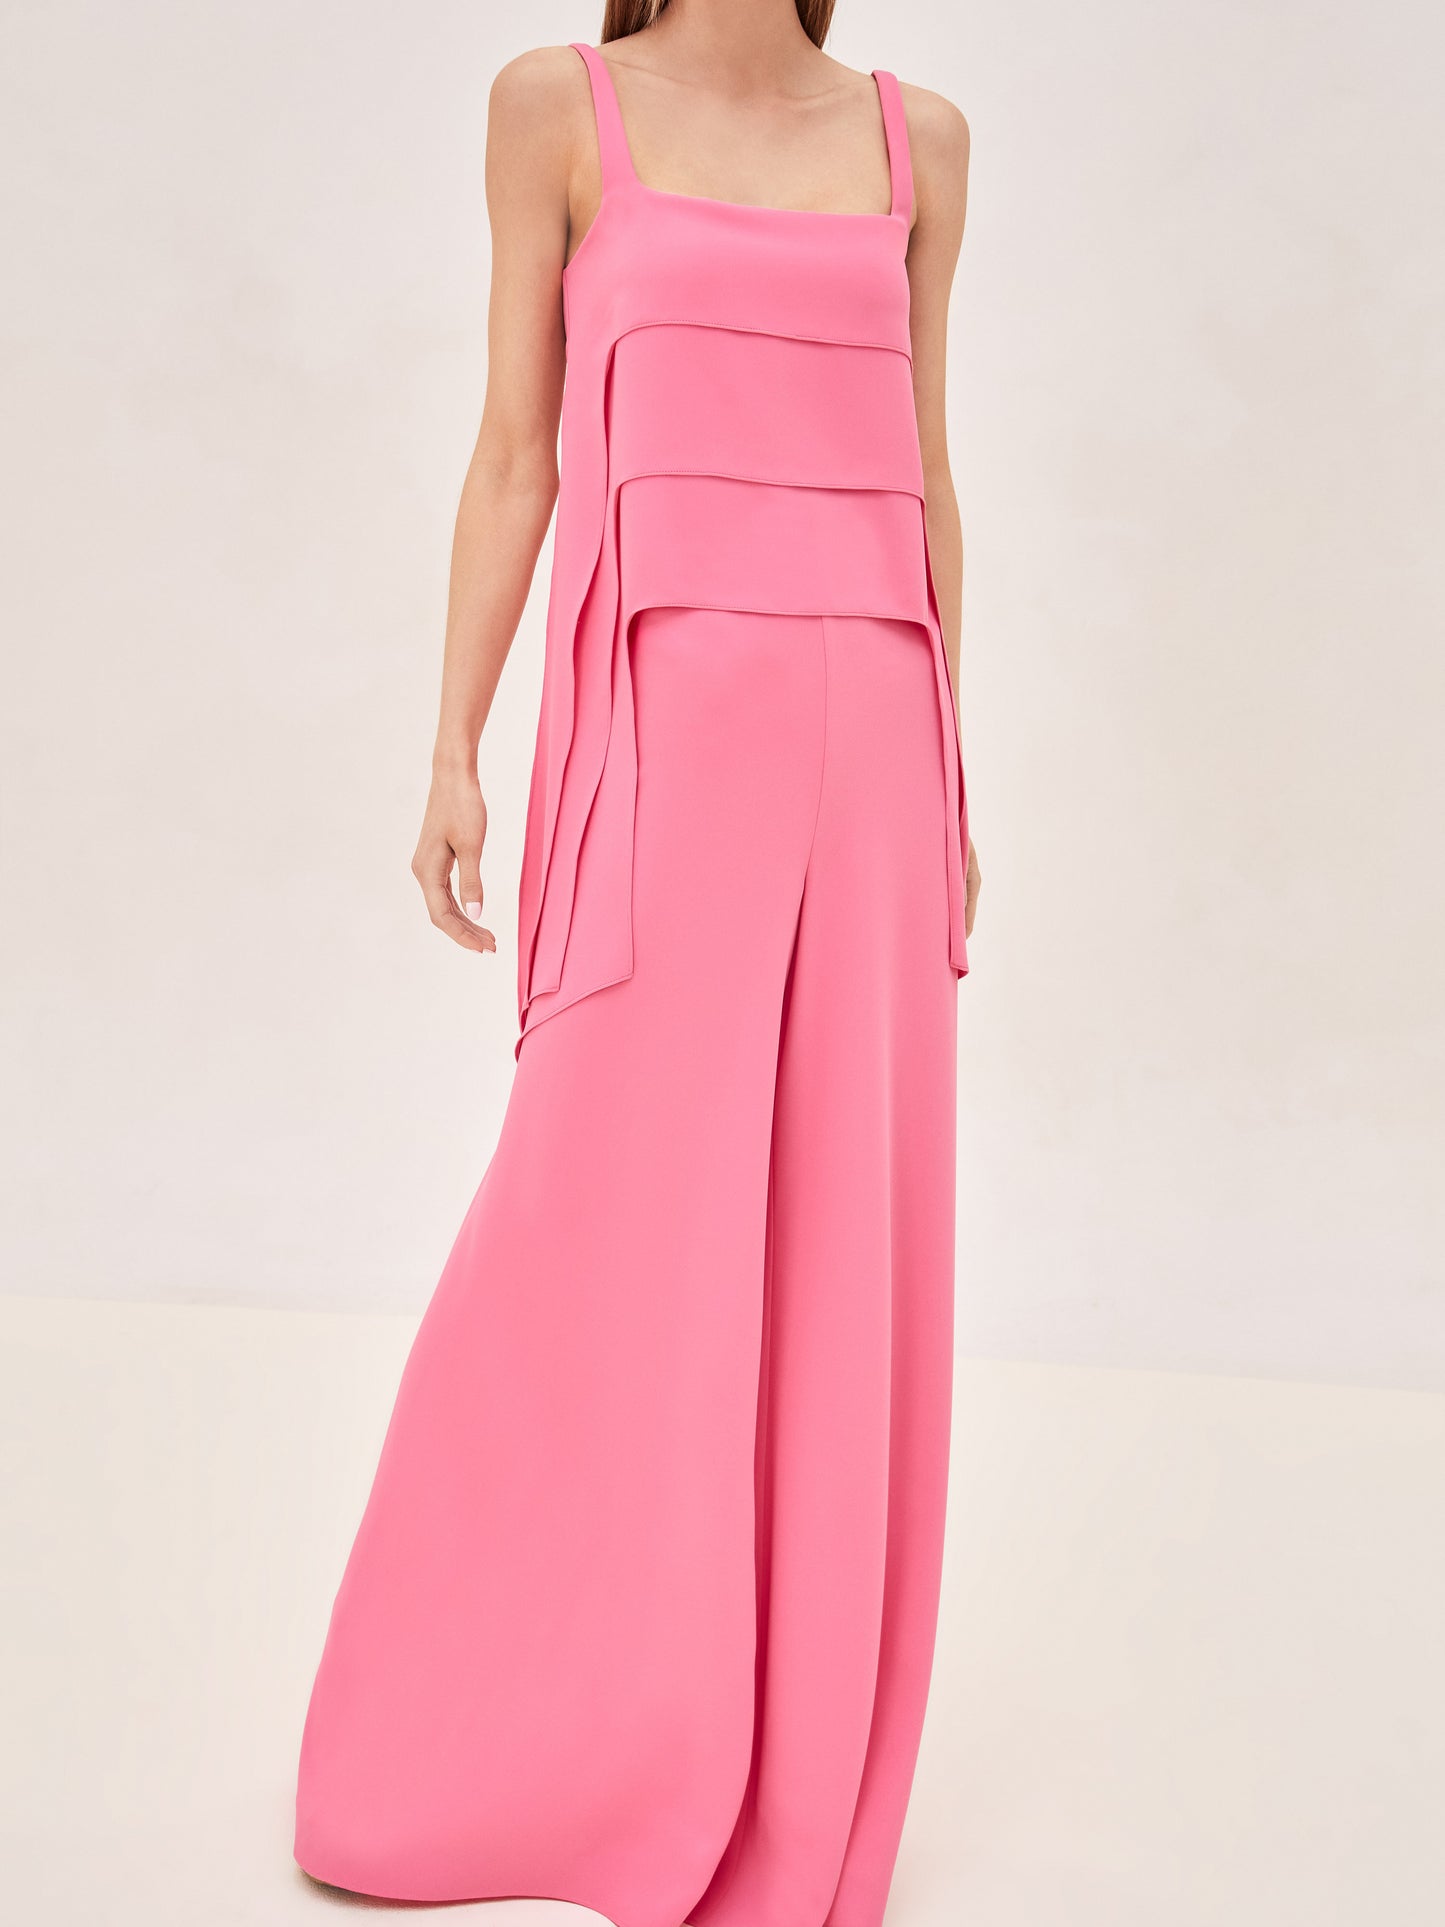 ALEXIS Dinah wide leg pant in pink hover image